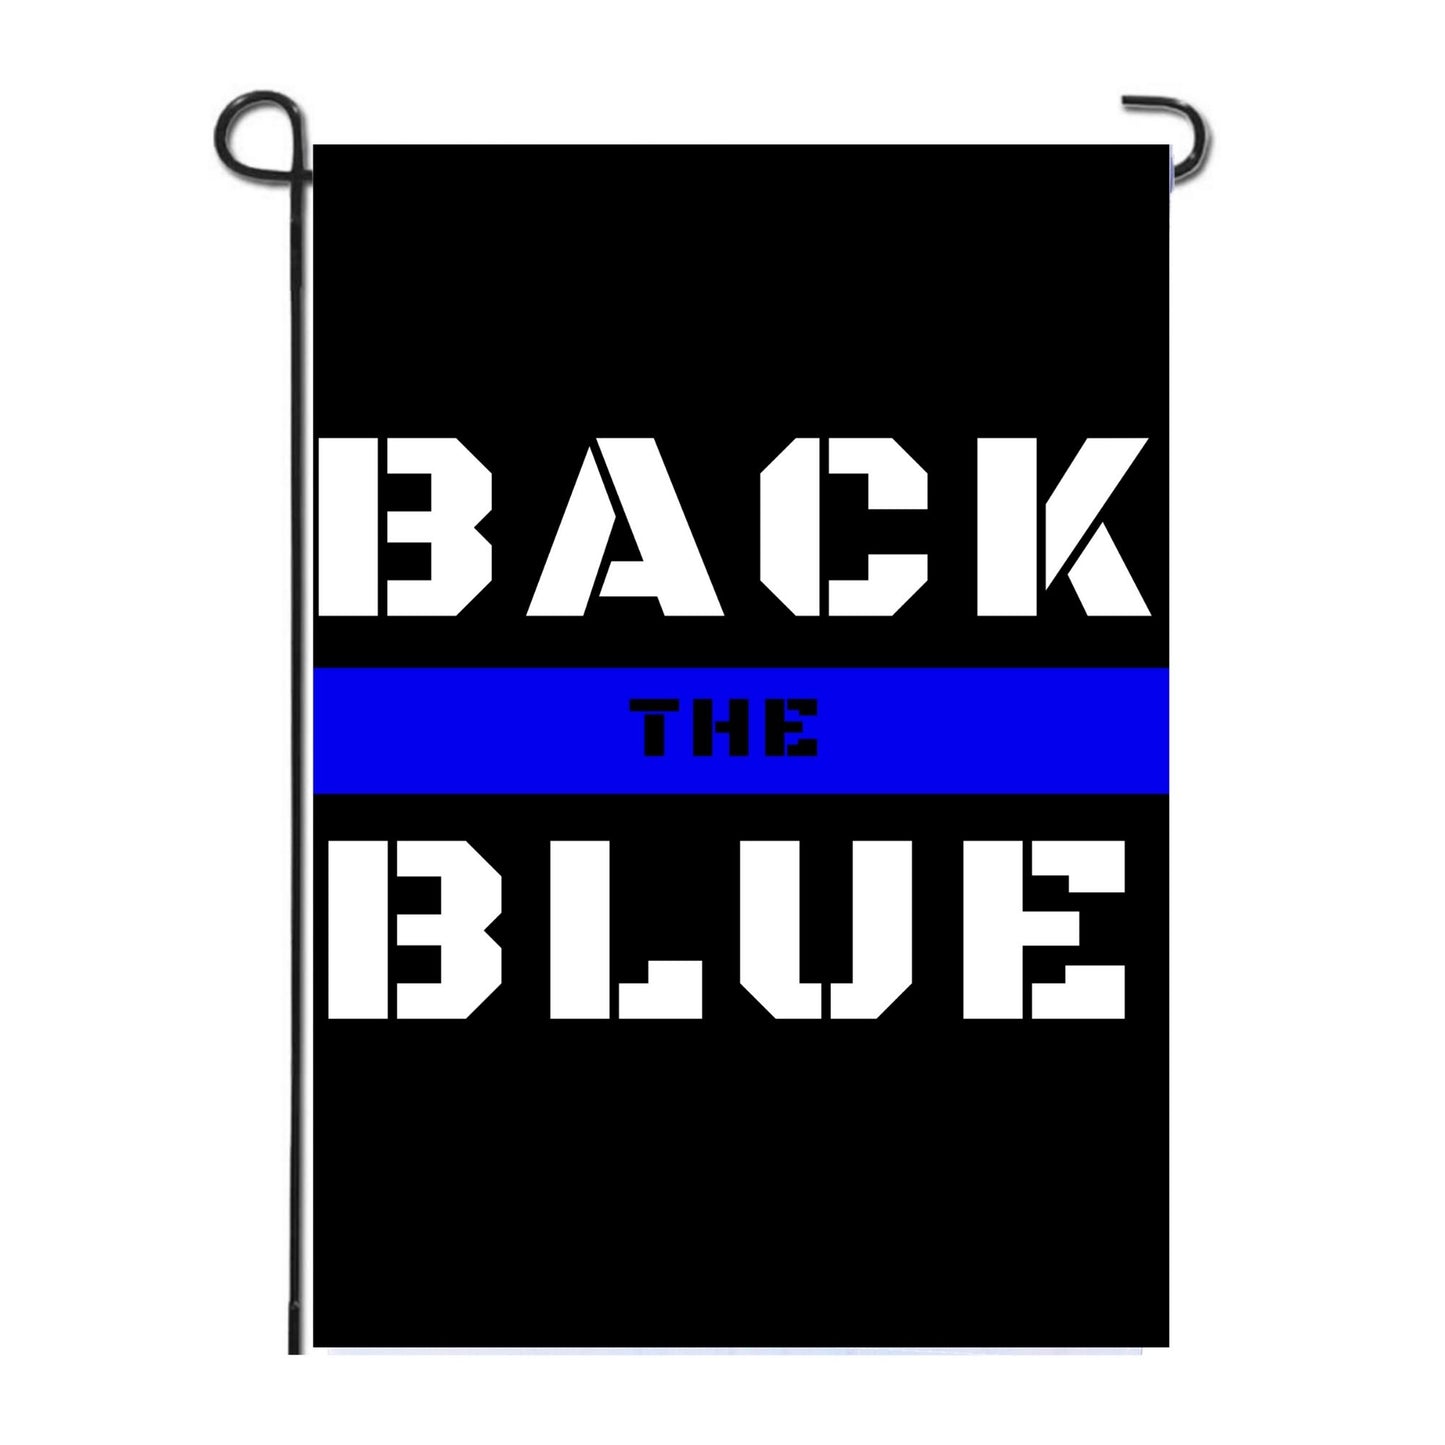 LiberTee Back The Blue Line Garden Flag Double Sided Banner Black White & Blue Yard Stripe | Support Law Enforcement Decorative Durable Outdoor American Police Flag - 12x18